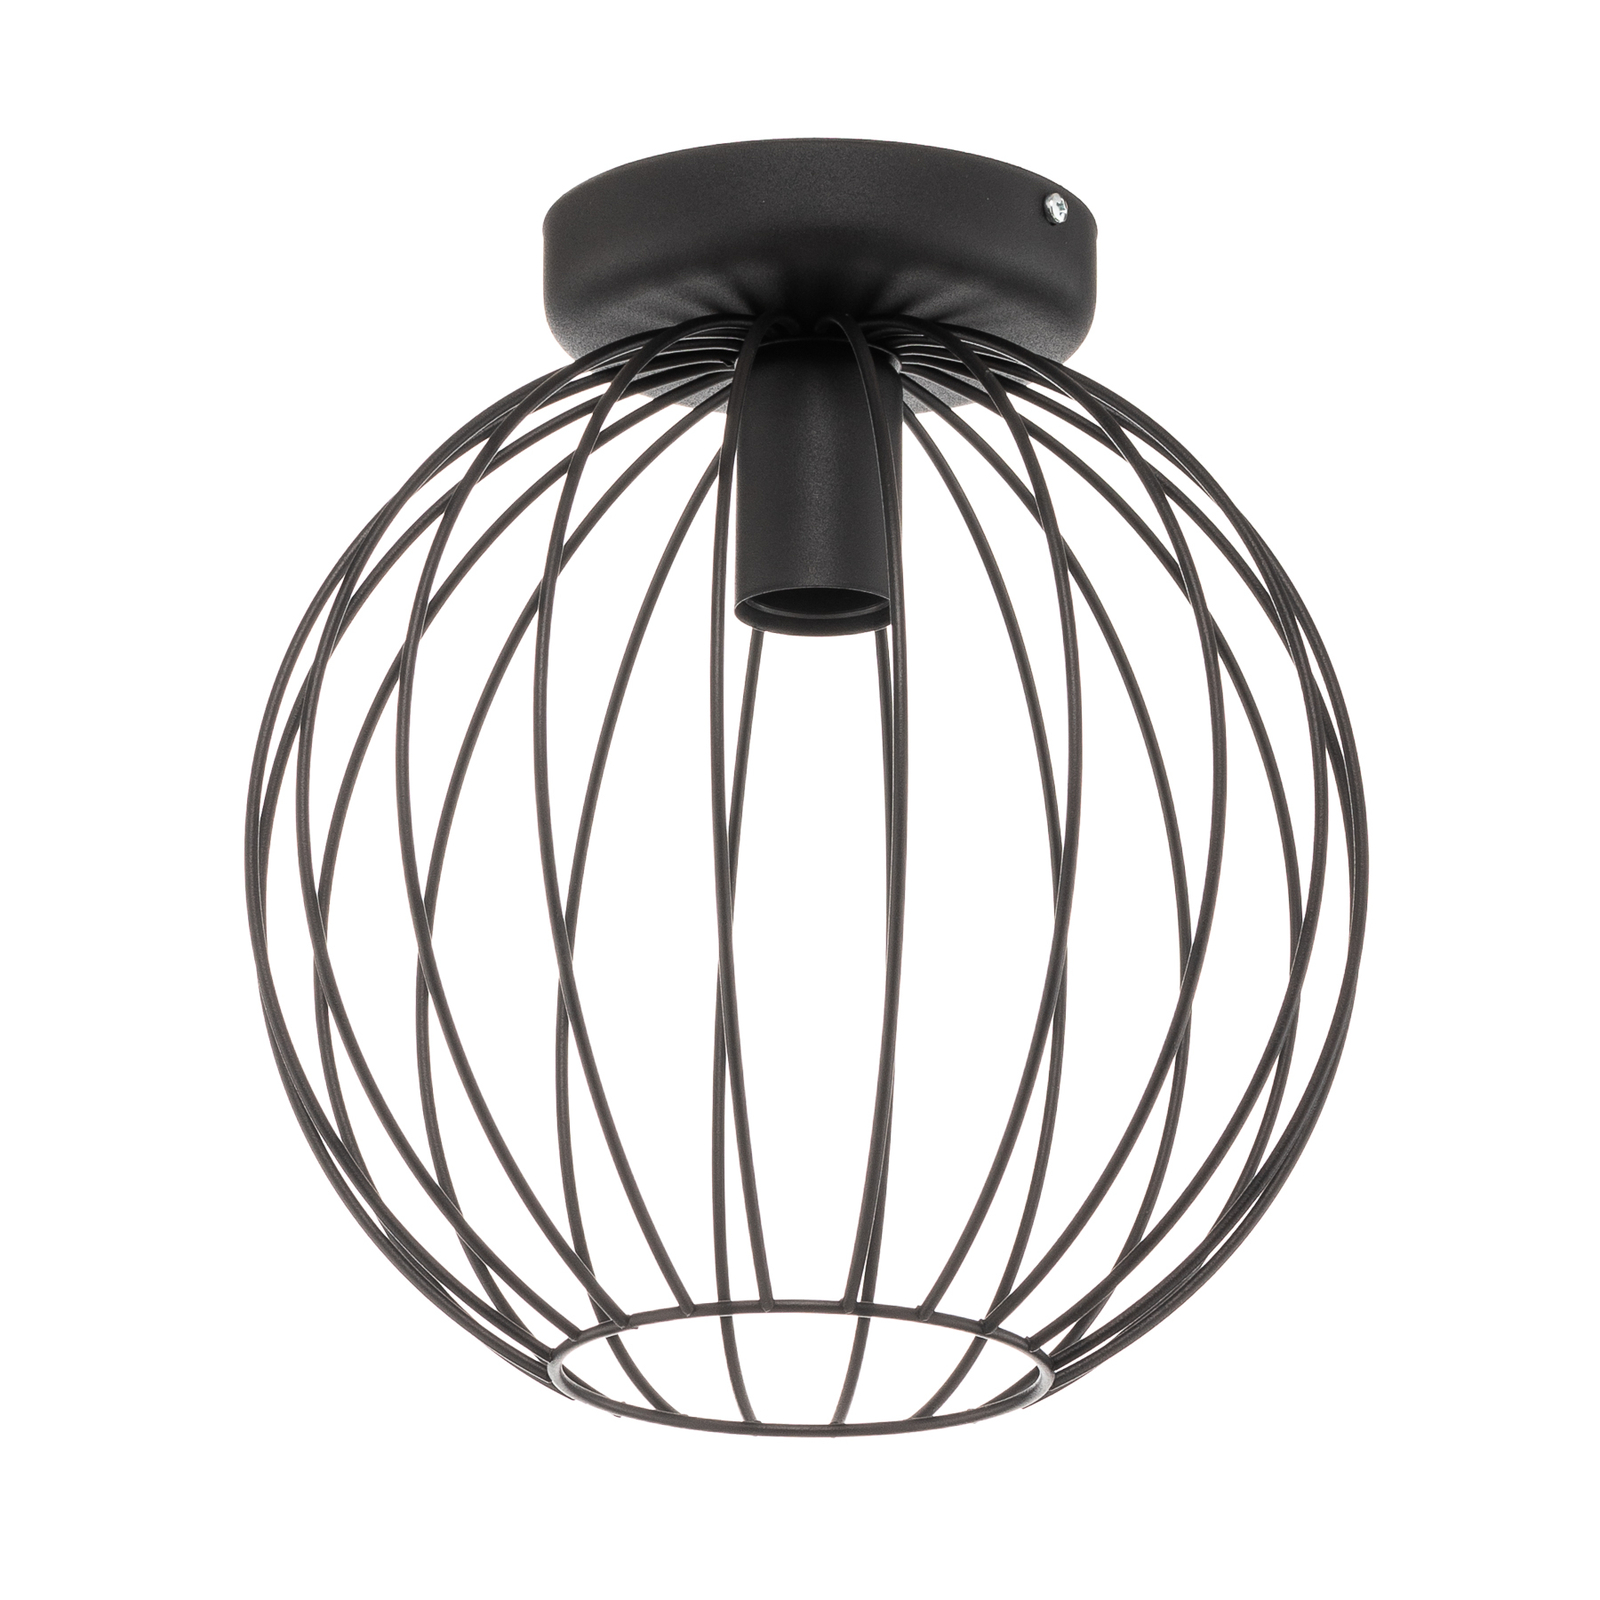 Cumera ceiling lamp with open cage shade, Ø 30cm